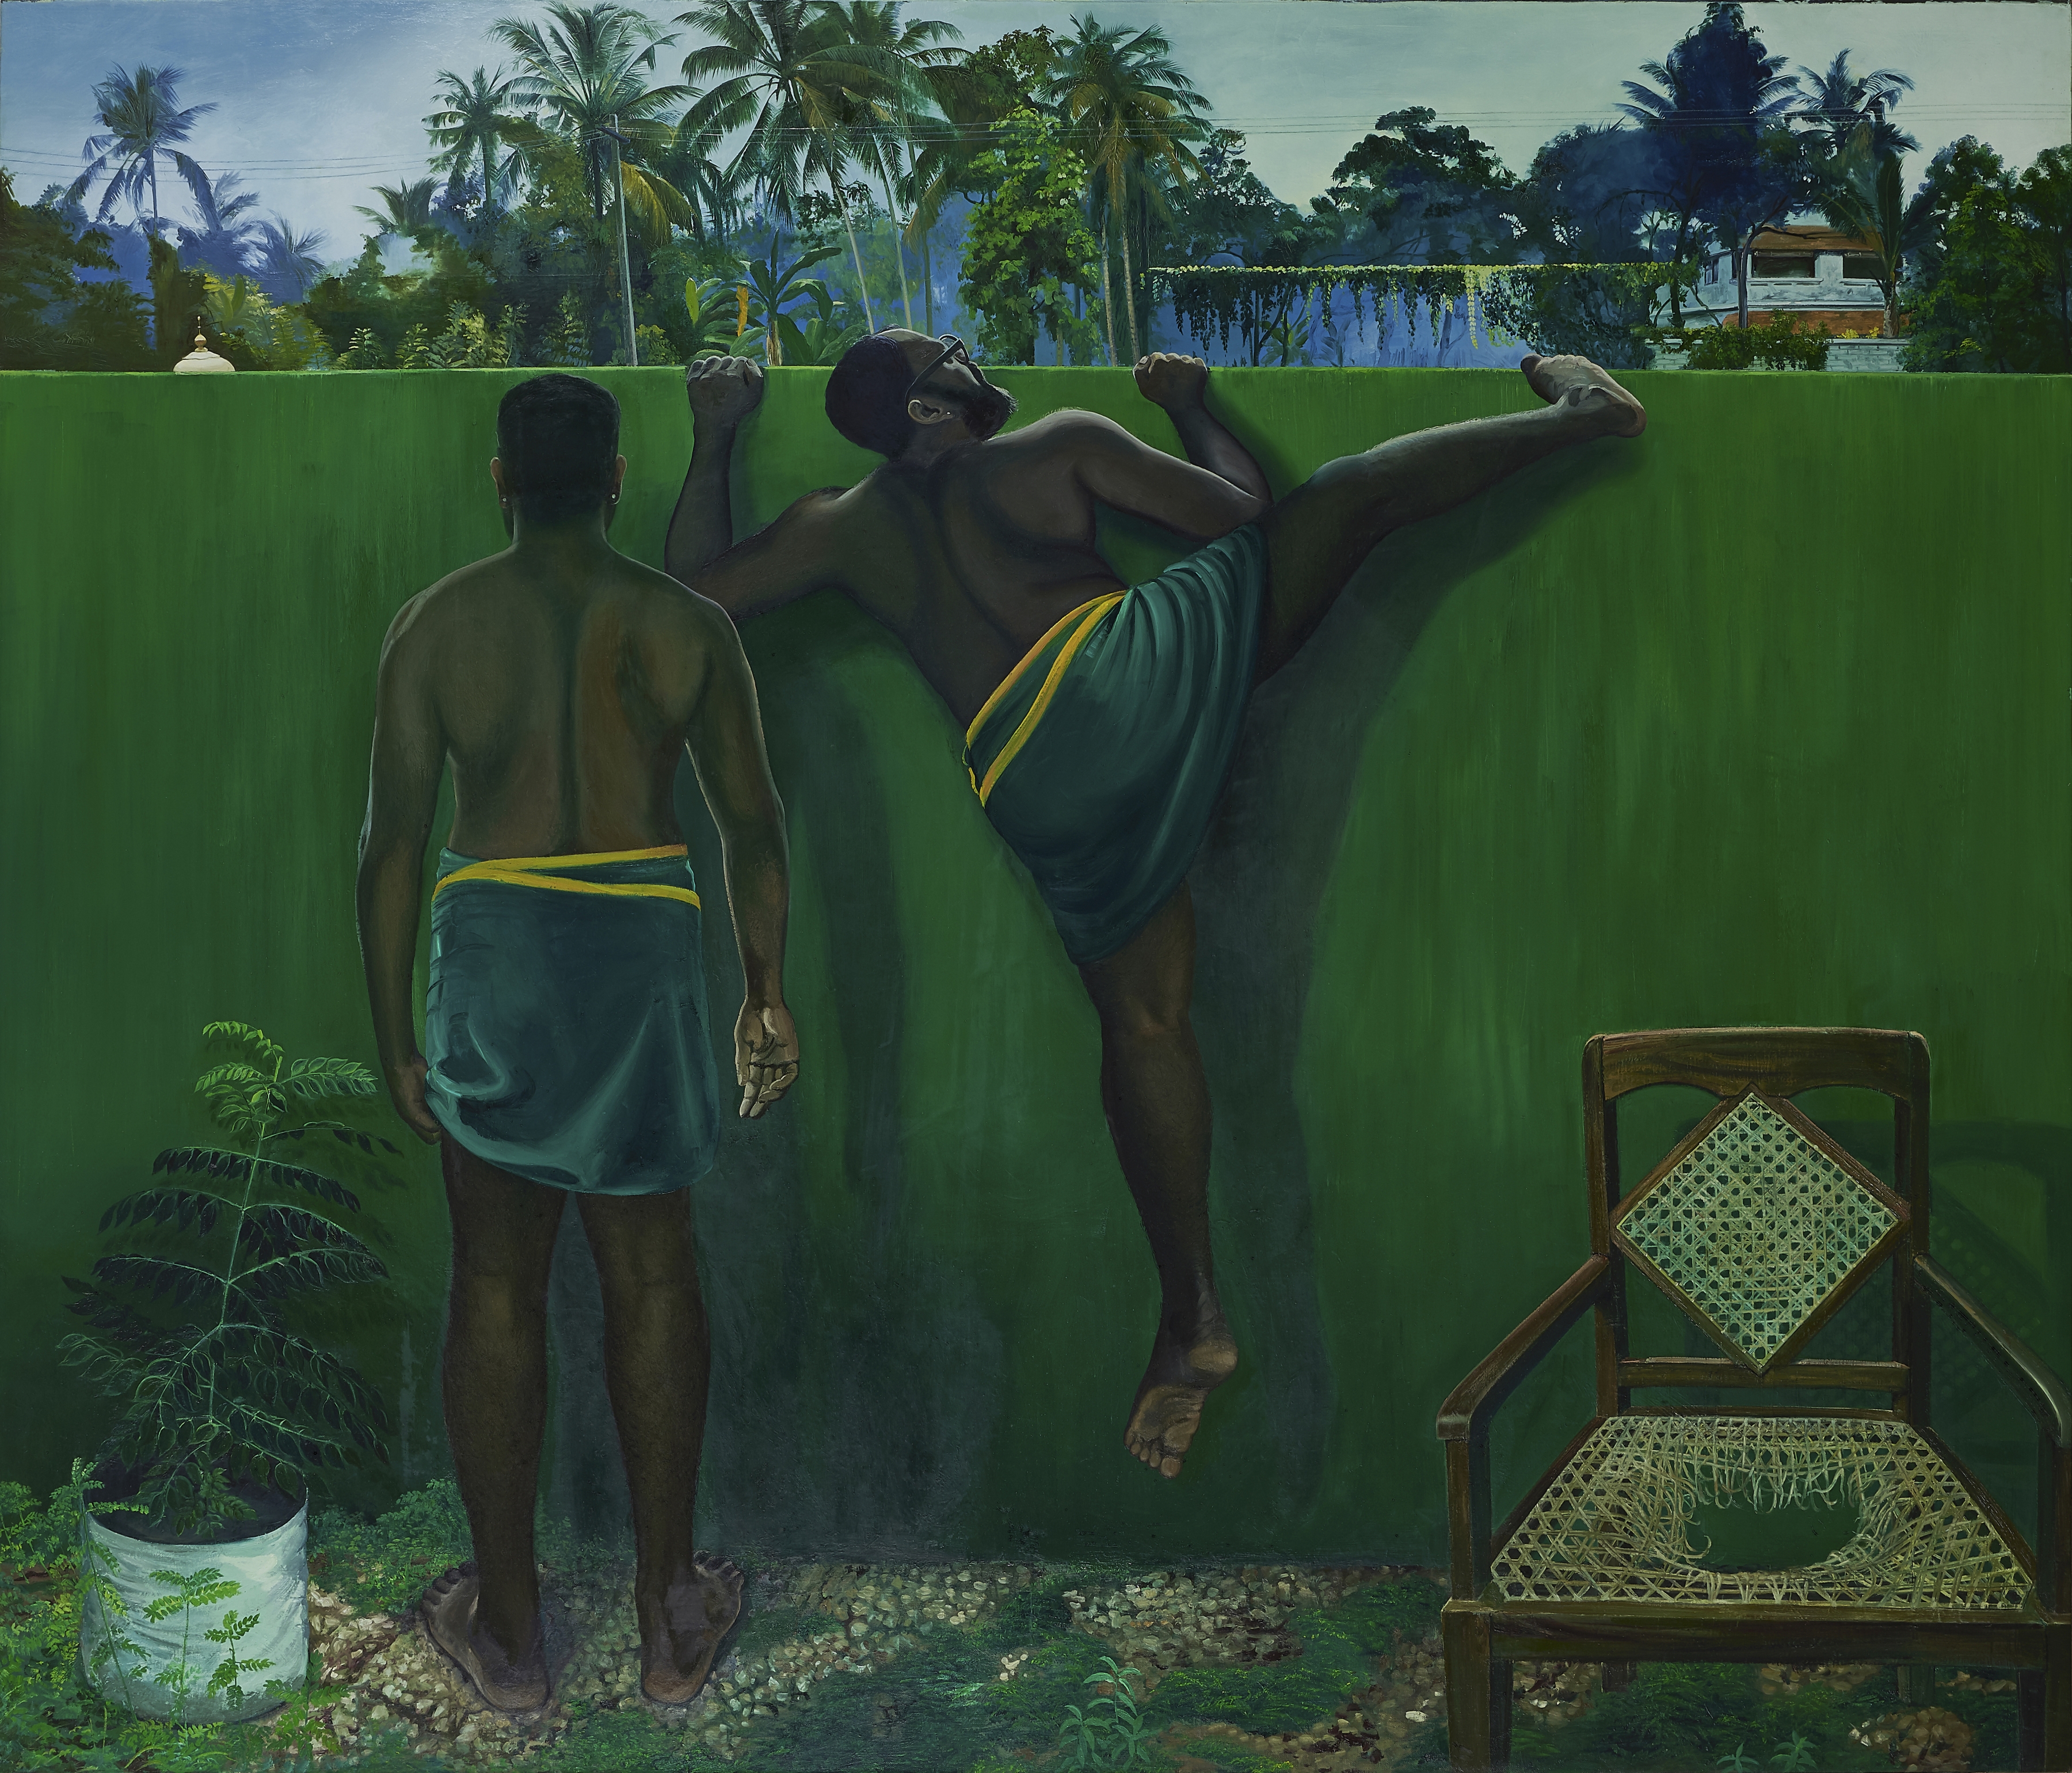 RATHEESH T., The Wall Between Us, 2020, oil on canvas,

72 x 84.4 in / 183 x 214.5 cm